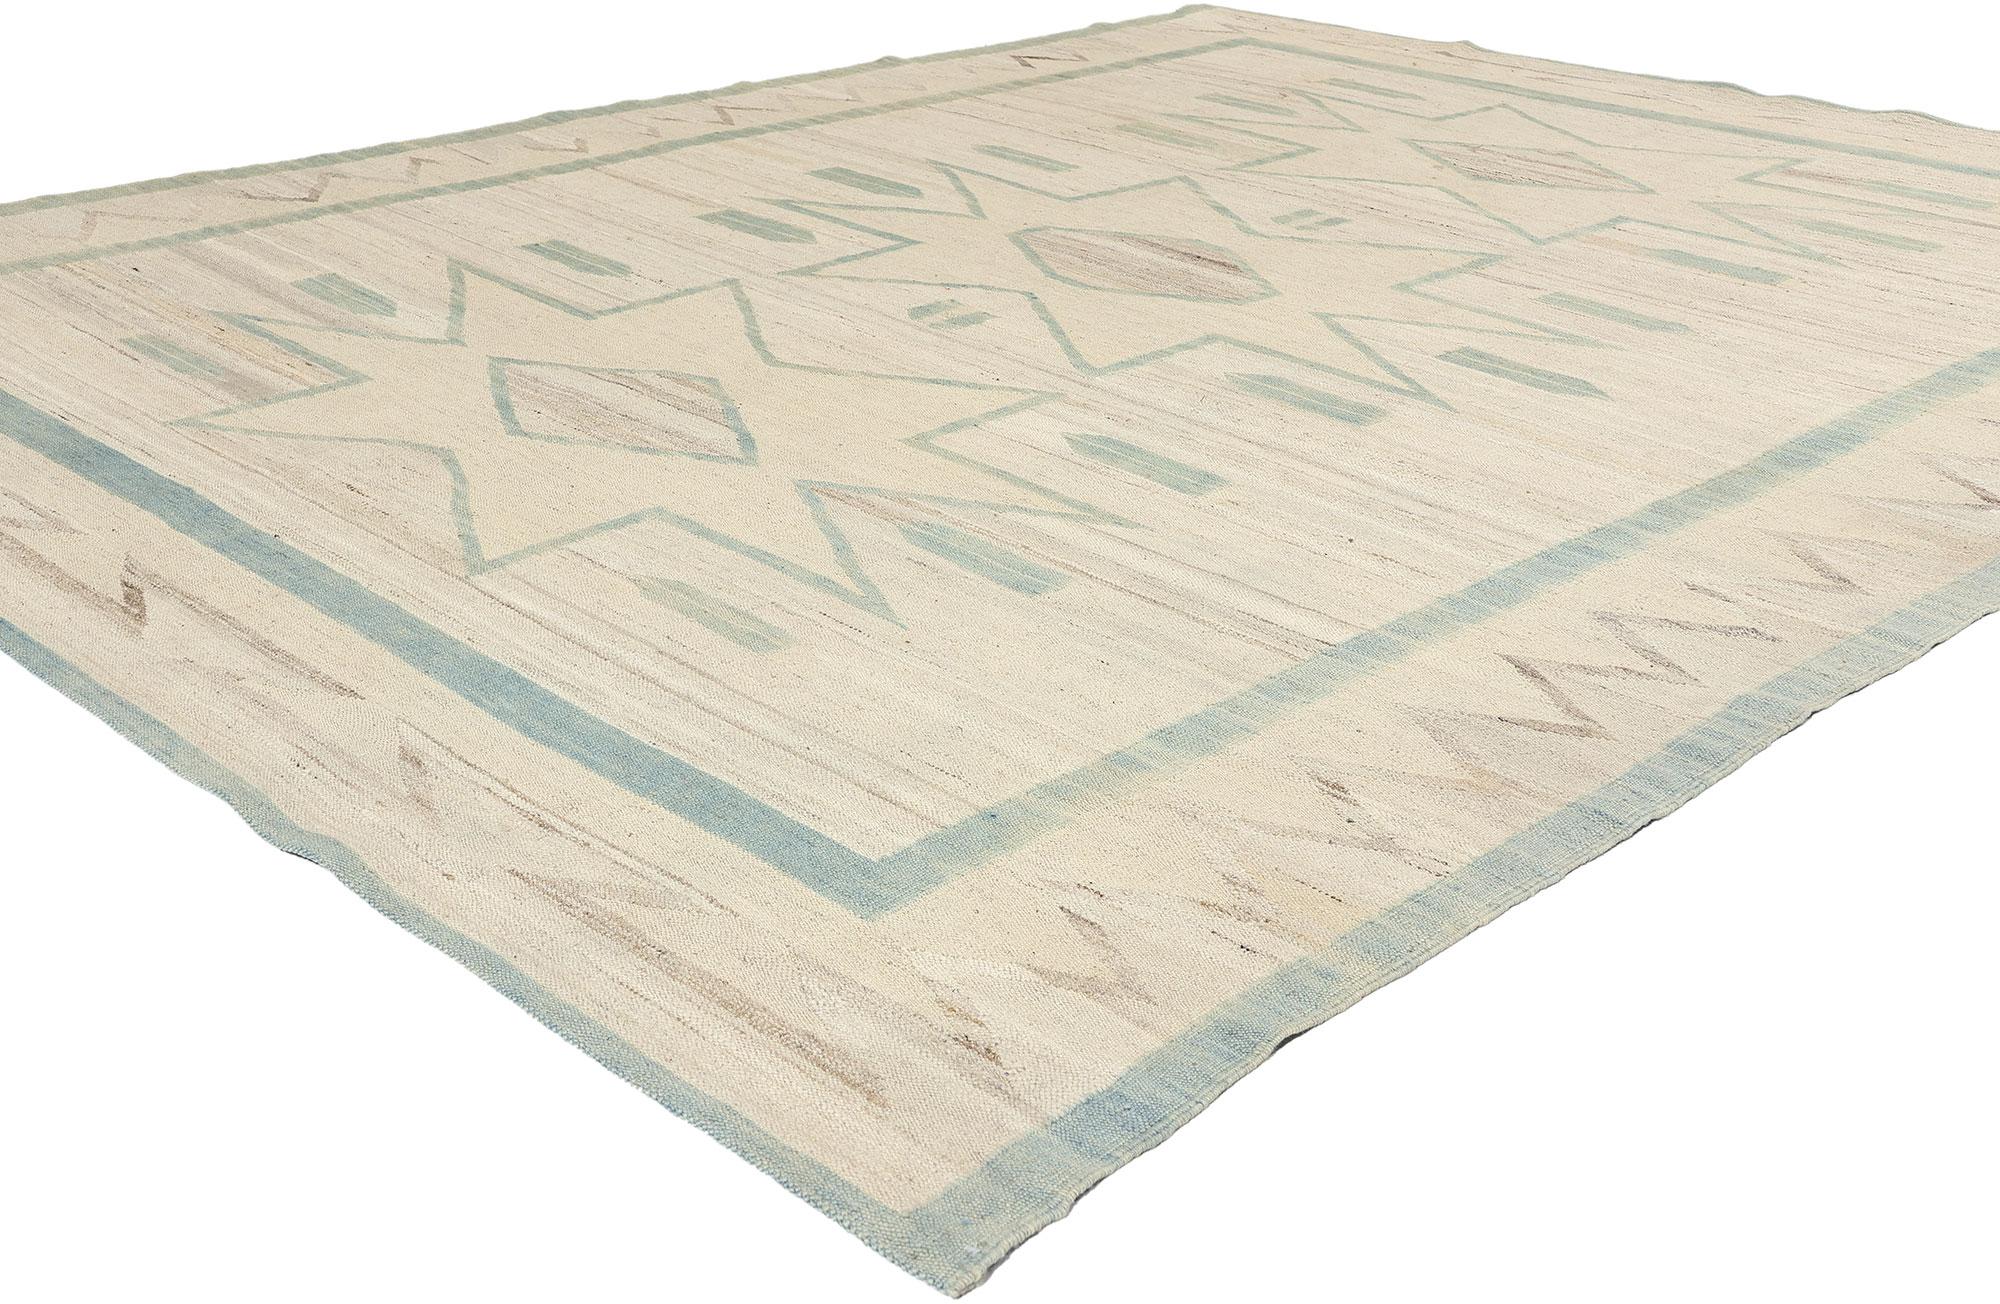 81096 Southwest Modern Desert Navajo-Style Rug, 07'10 x 09'07. Step into the captivating realm of this handwoven wool Southwest Modern Desert Chic Navajo-style rug, where each thread whispers tales of tradition and modernity woven together